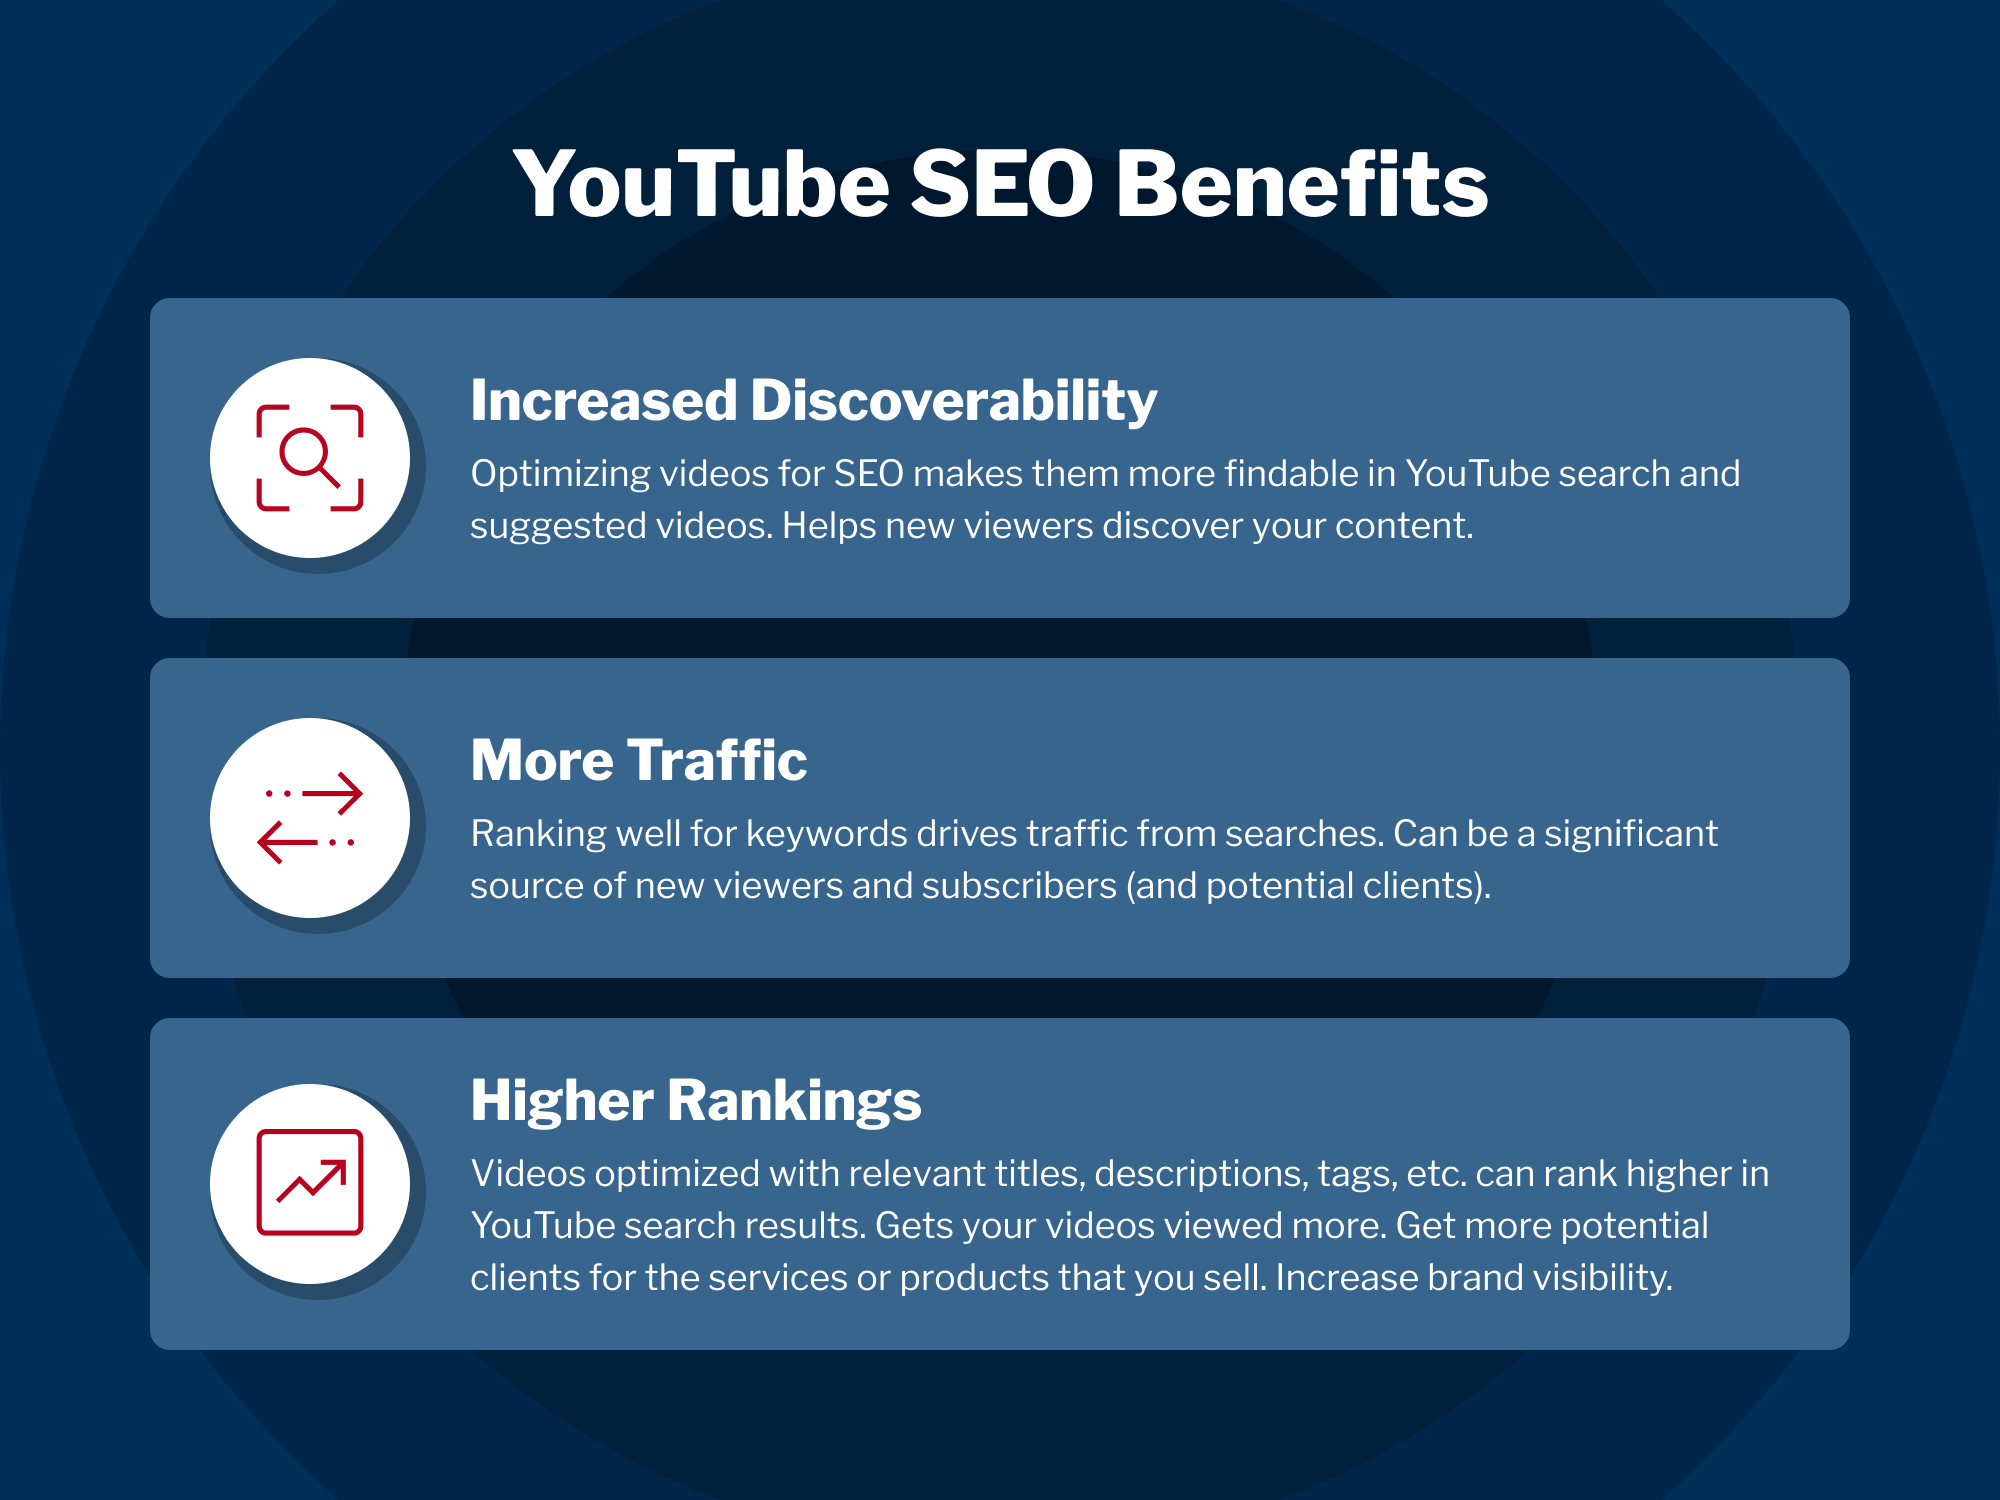 Graphic listing YouTube SEO Benefits: Increased Discoverability, More Traffic, and Higher Rankings with corresponding icons.